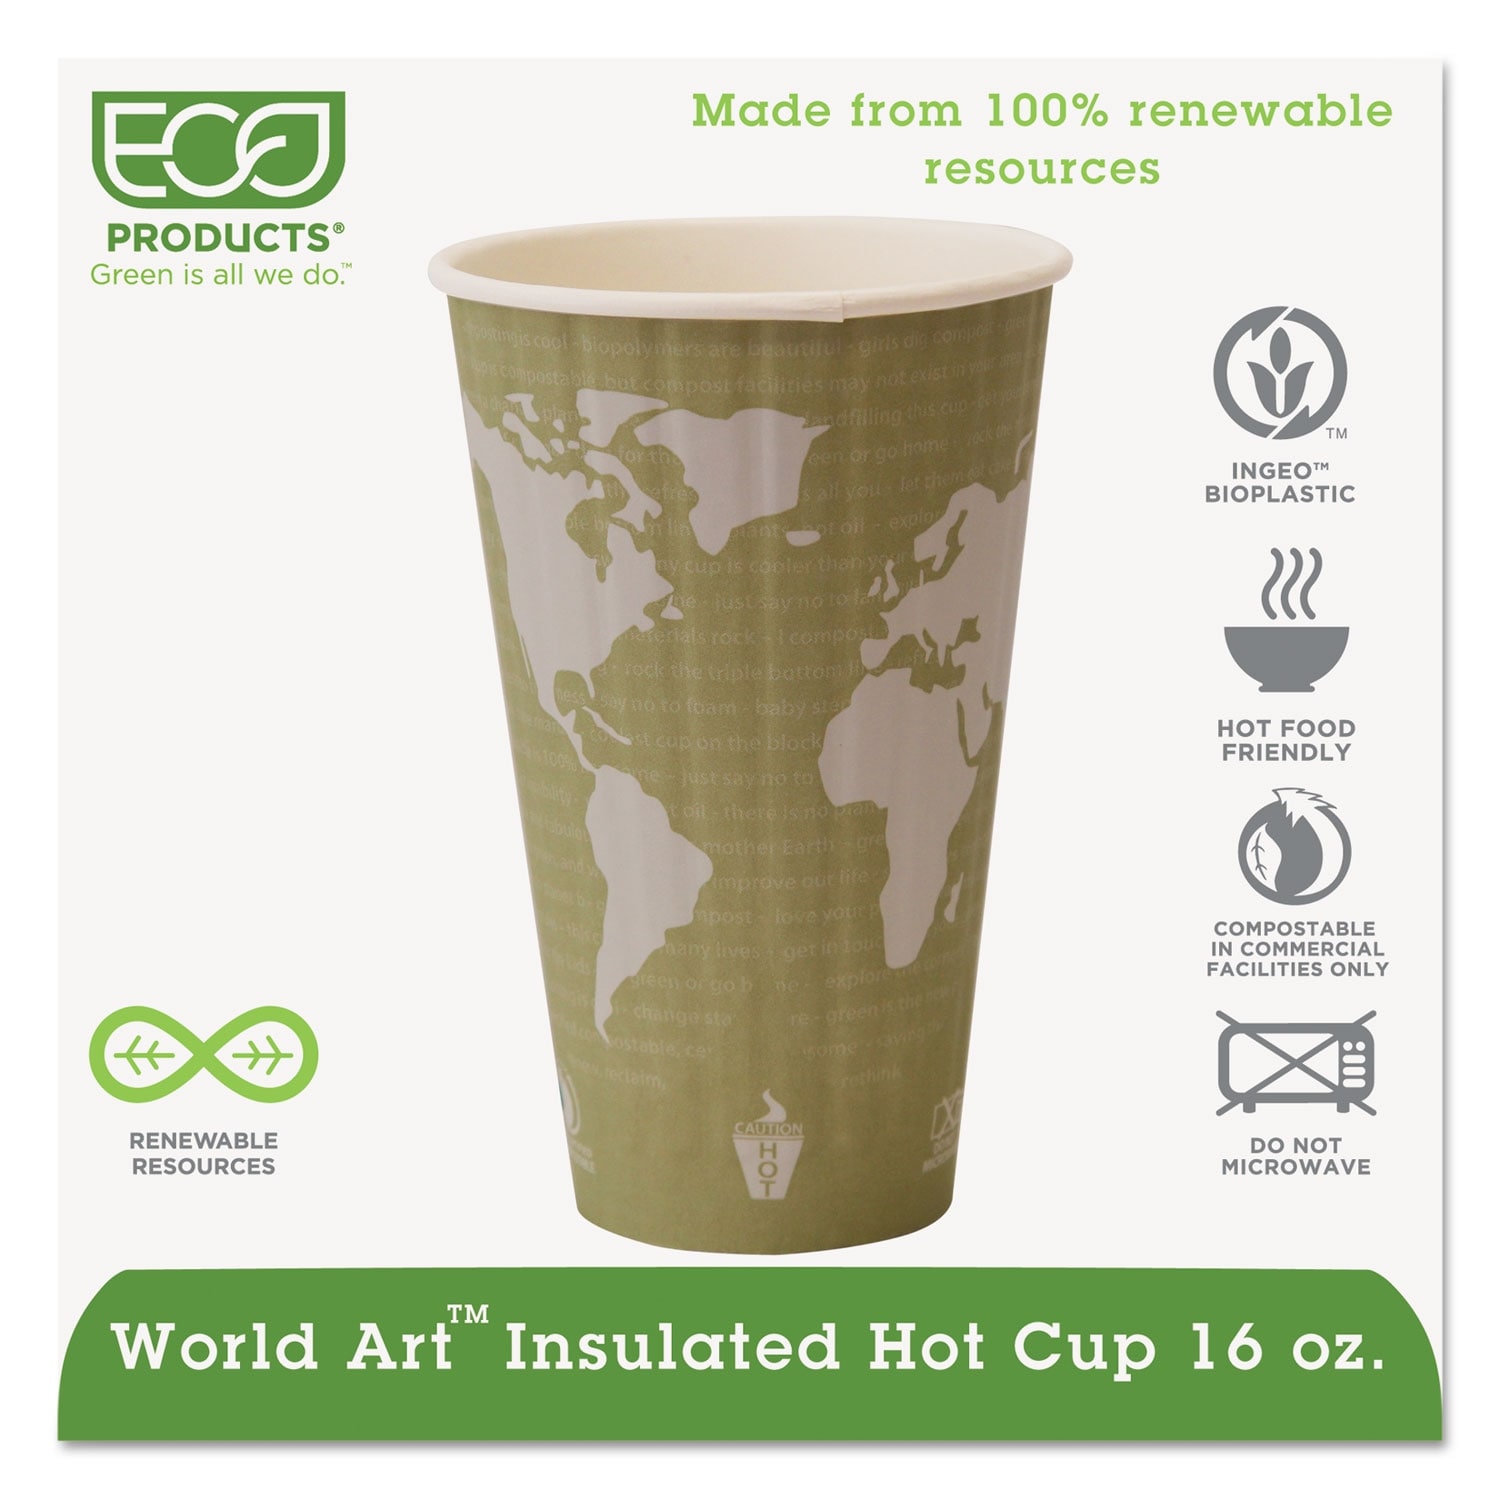 Renewable and Compostable Insulated Hot Cups, PLA, 15 Pks/Crtn - White